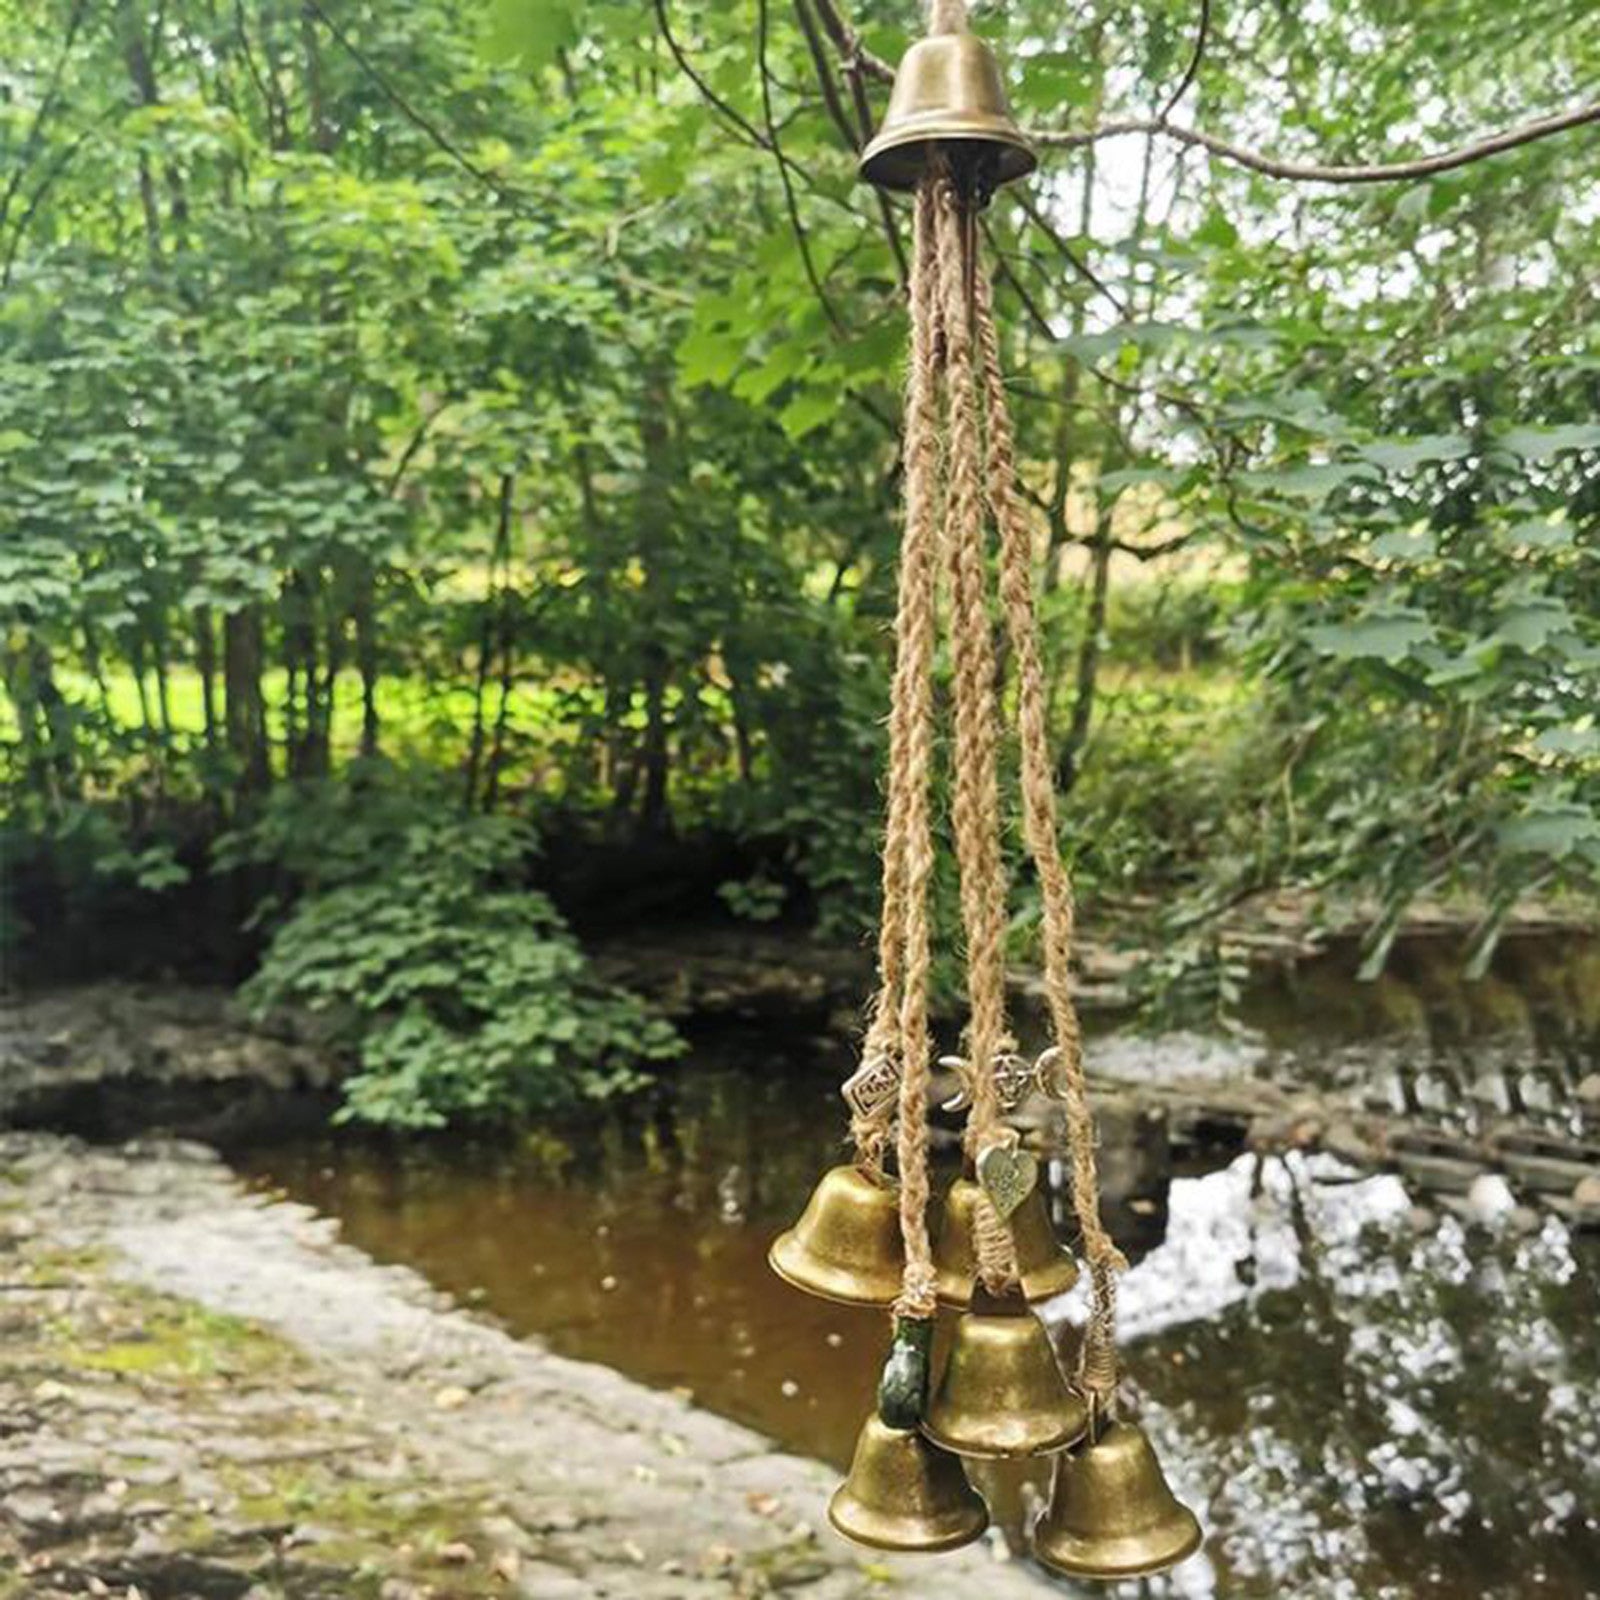 Wall-mounted Wind Chimes Praying For Blessings, Bells, Doors